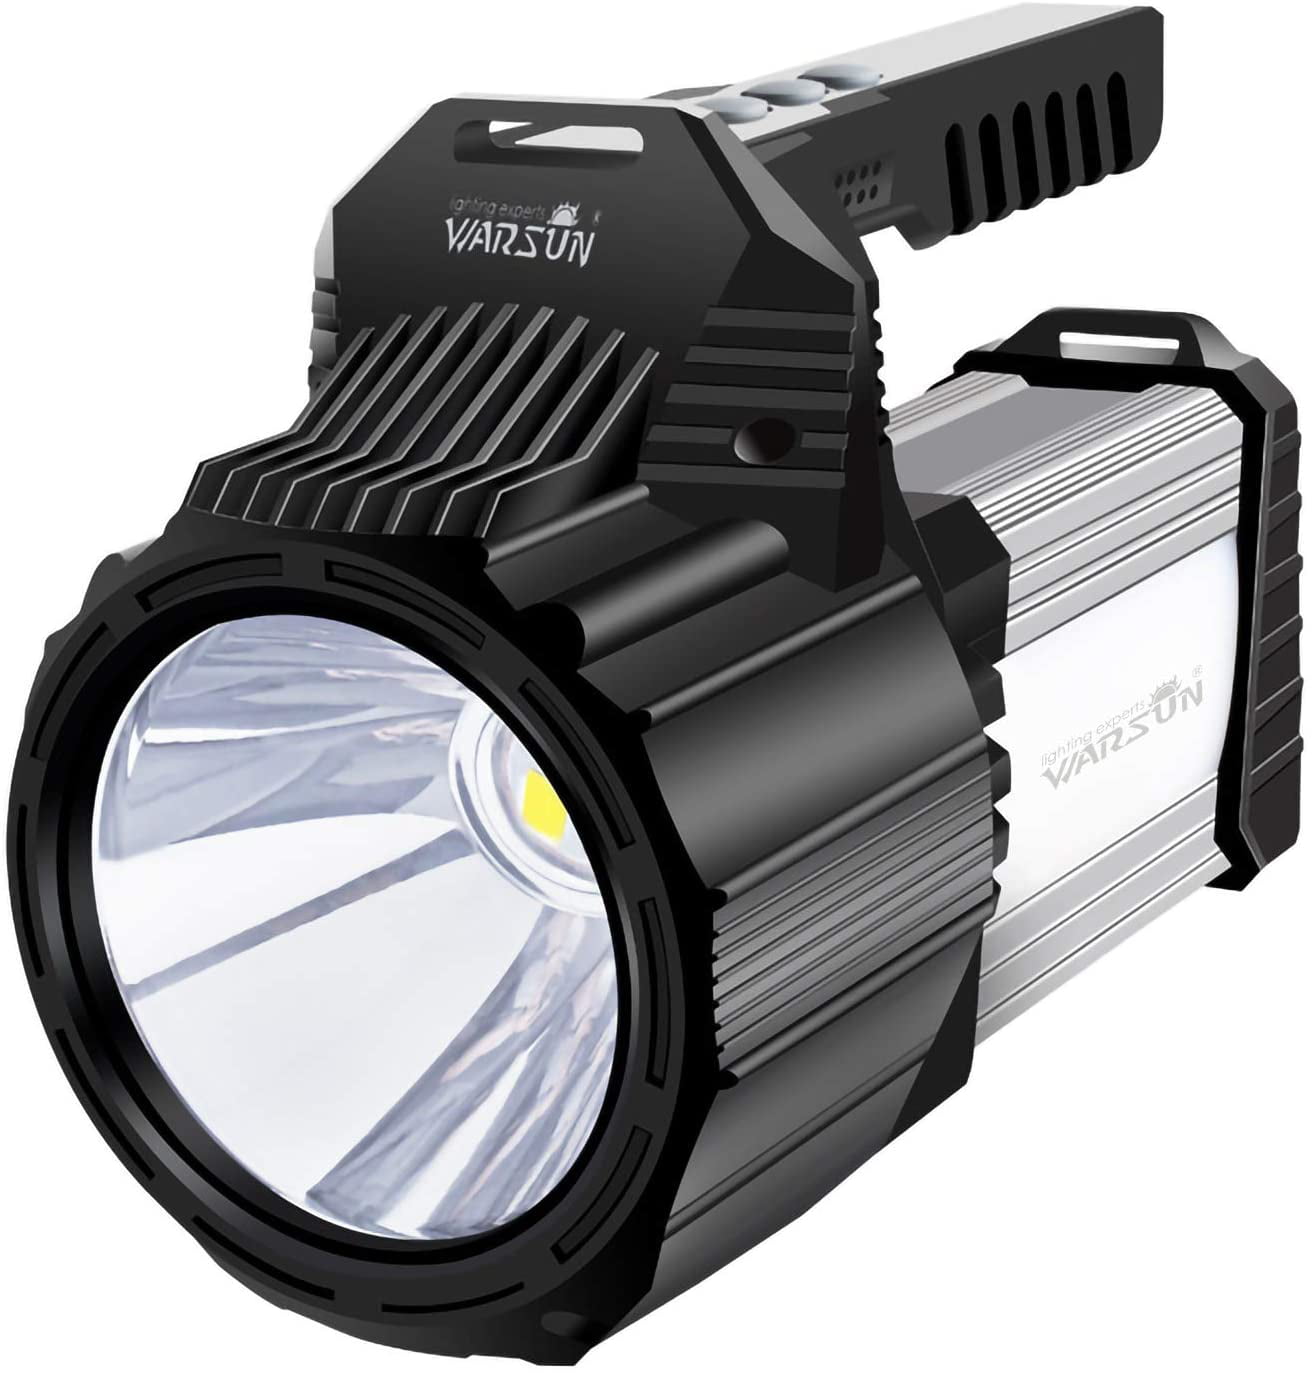 Details about   10000MAh LED Bright Searchlight Handheld Spotlight Flashlight Rechargeable USB 